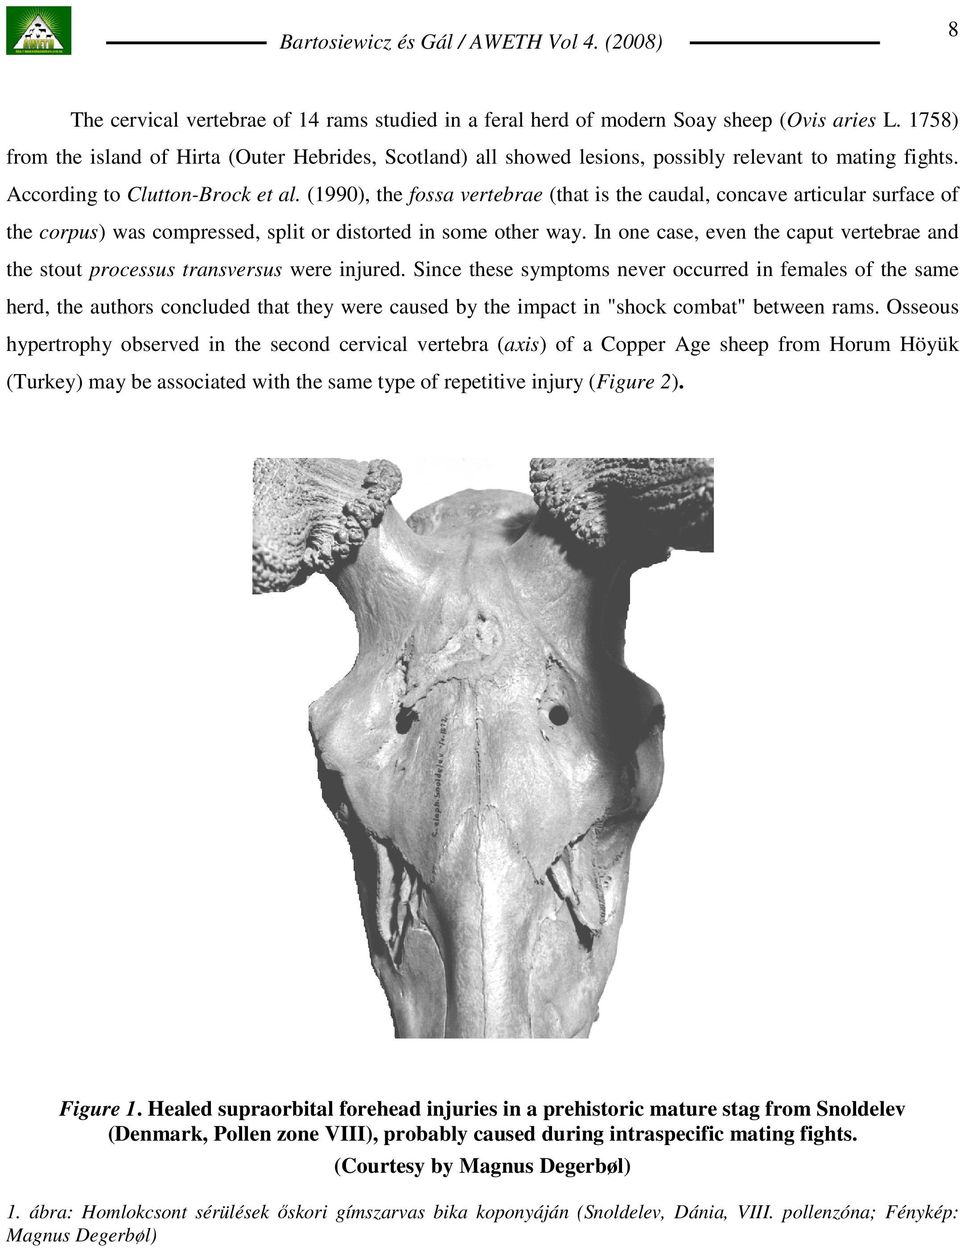 (1990), the fossa vertebrae (that is the caudal, concave articular surface of the corpus) was compressed, split or distorted in some other way.